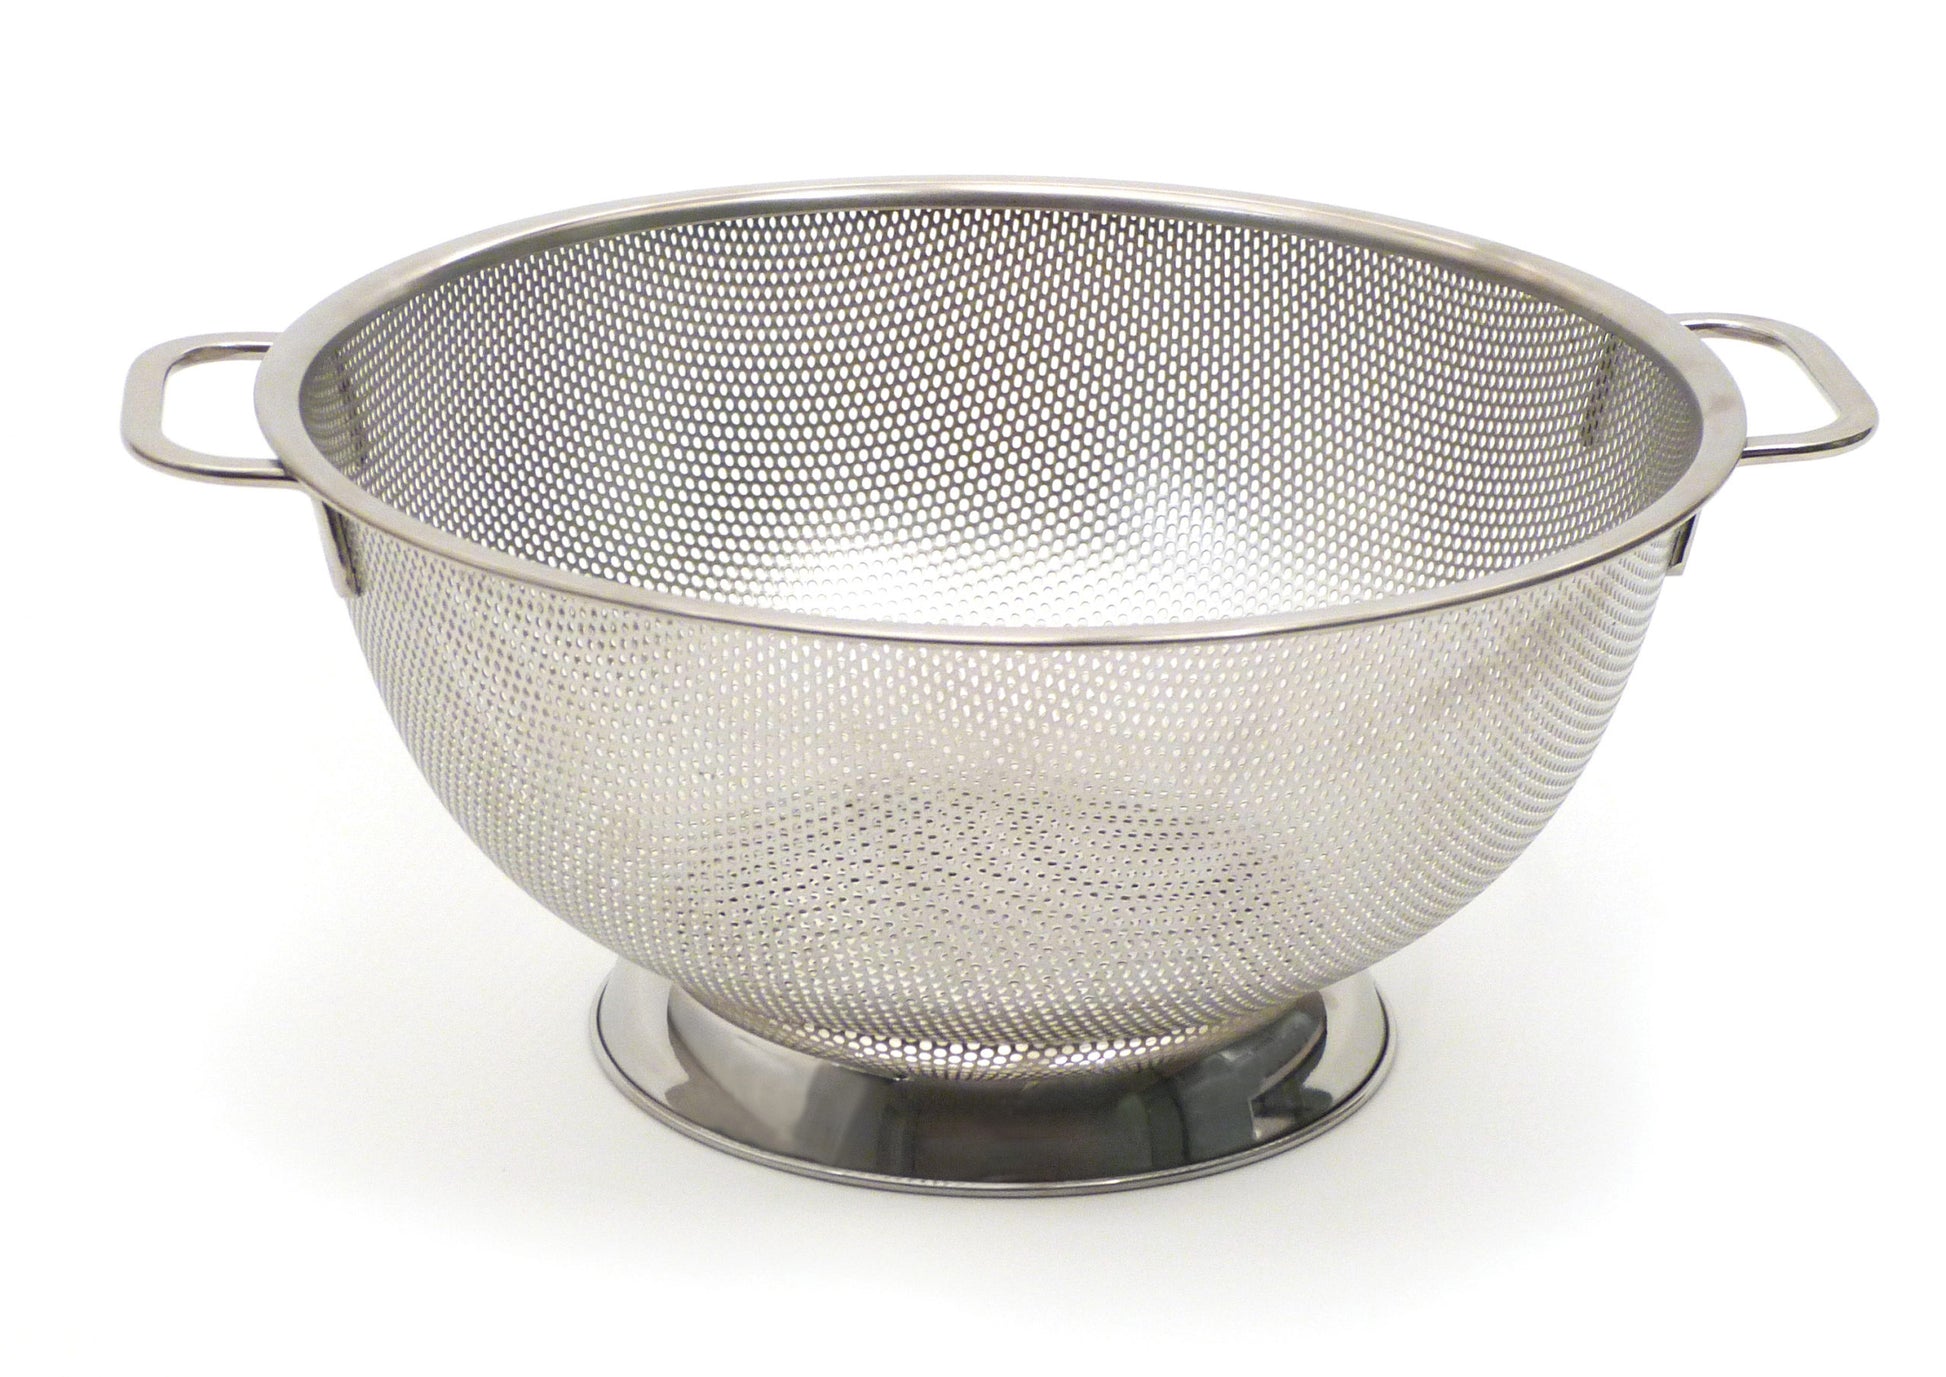 stainless steel colander on white background.